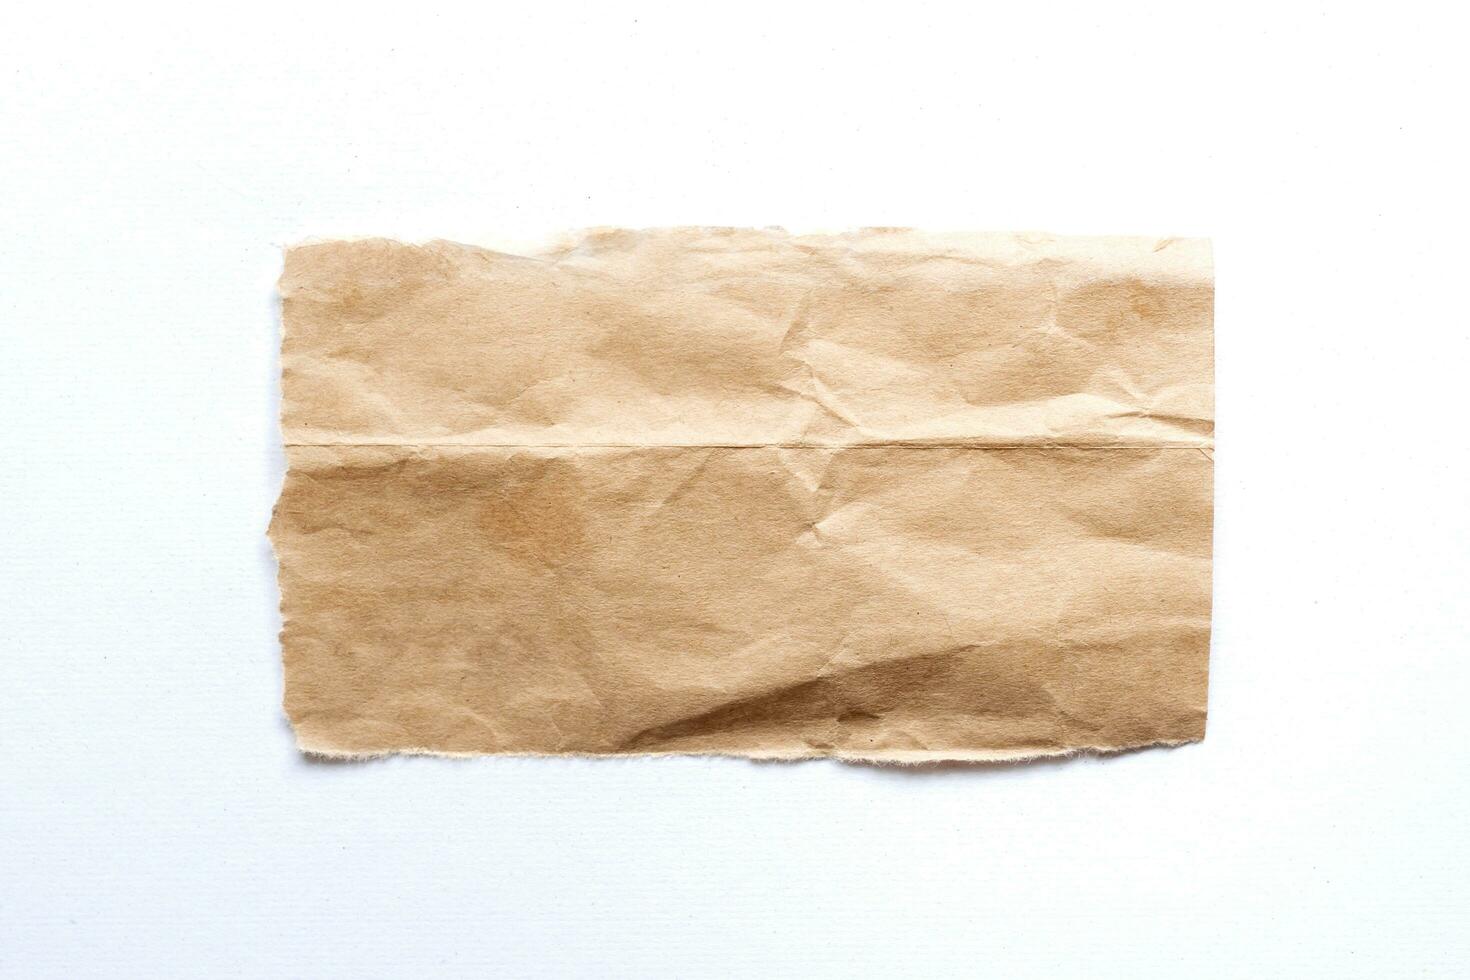 Close up of a ripped piece of brown paper on white background photo